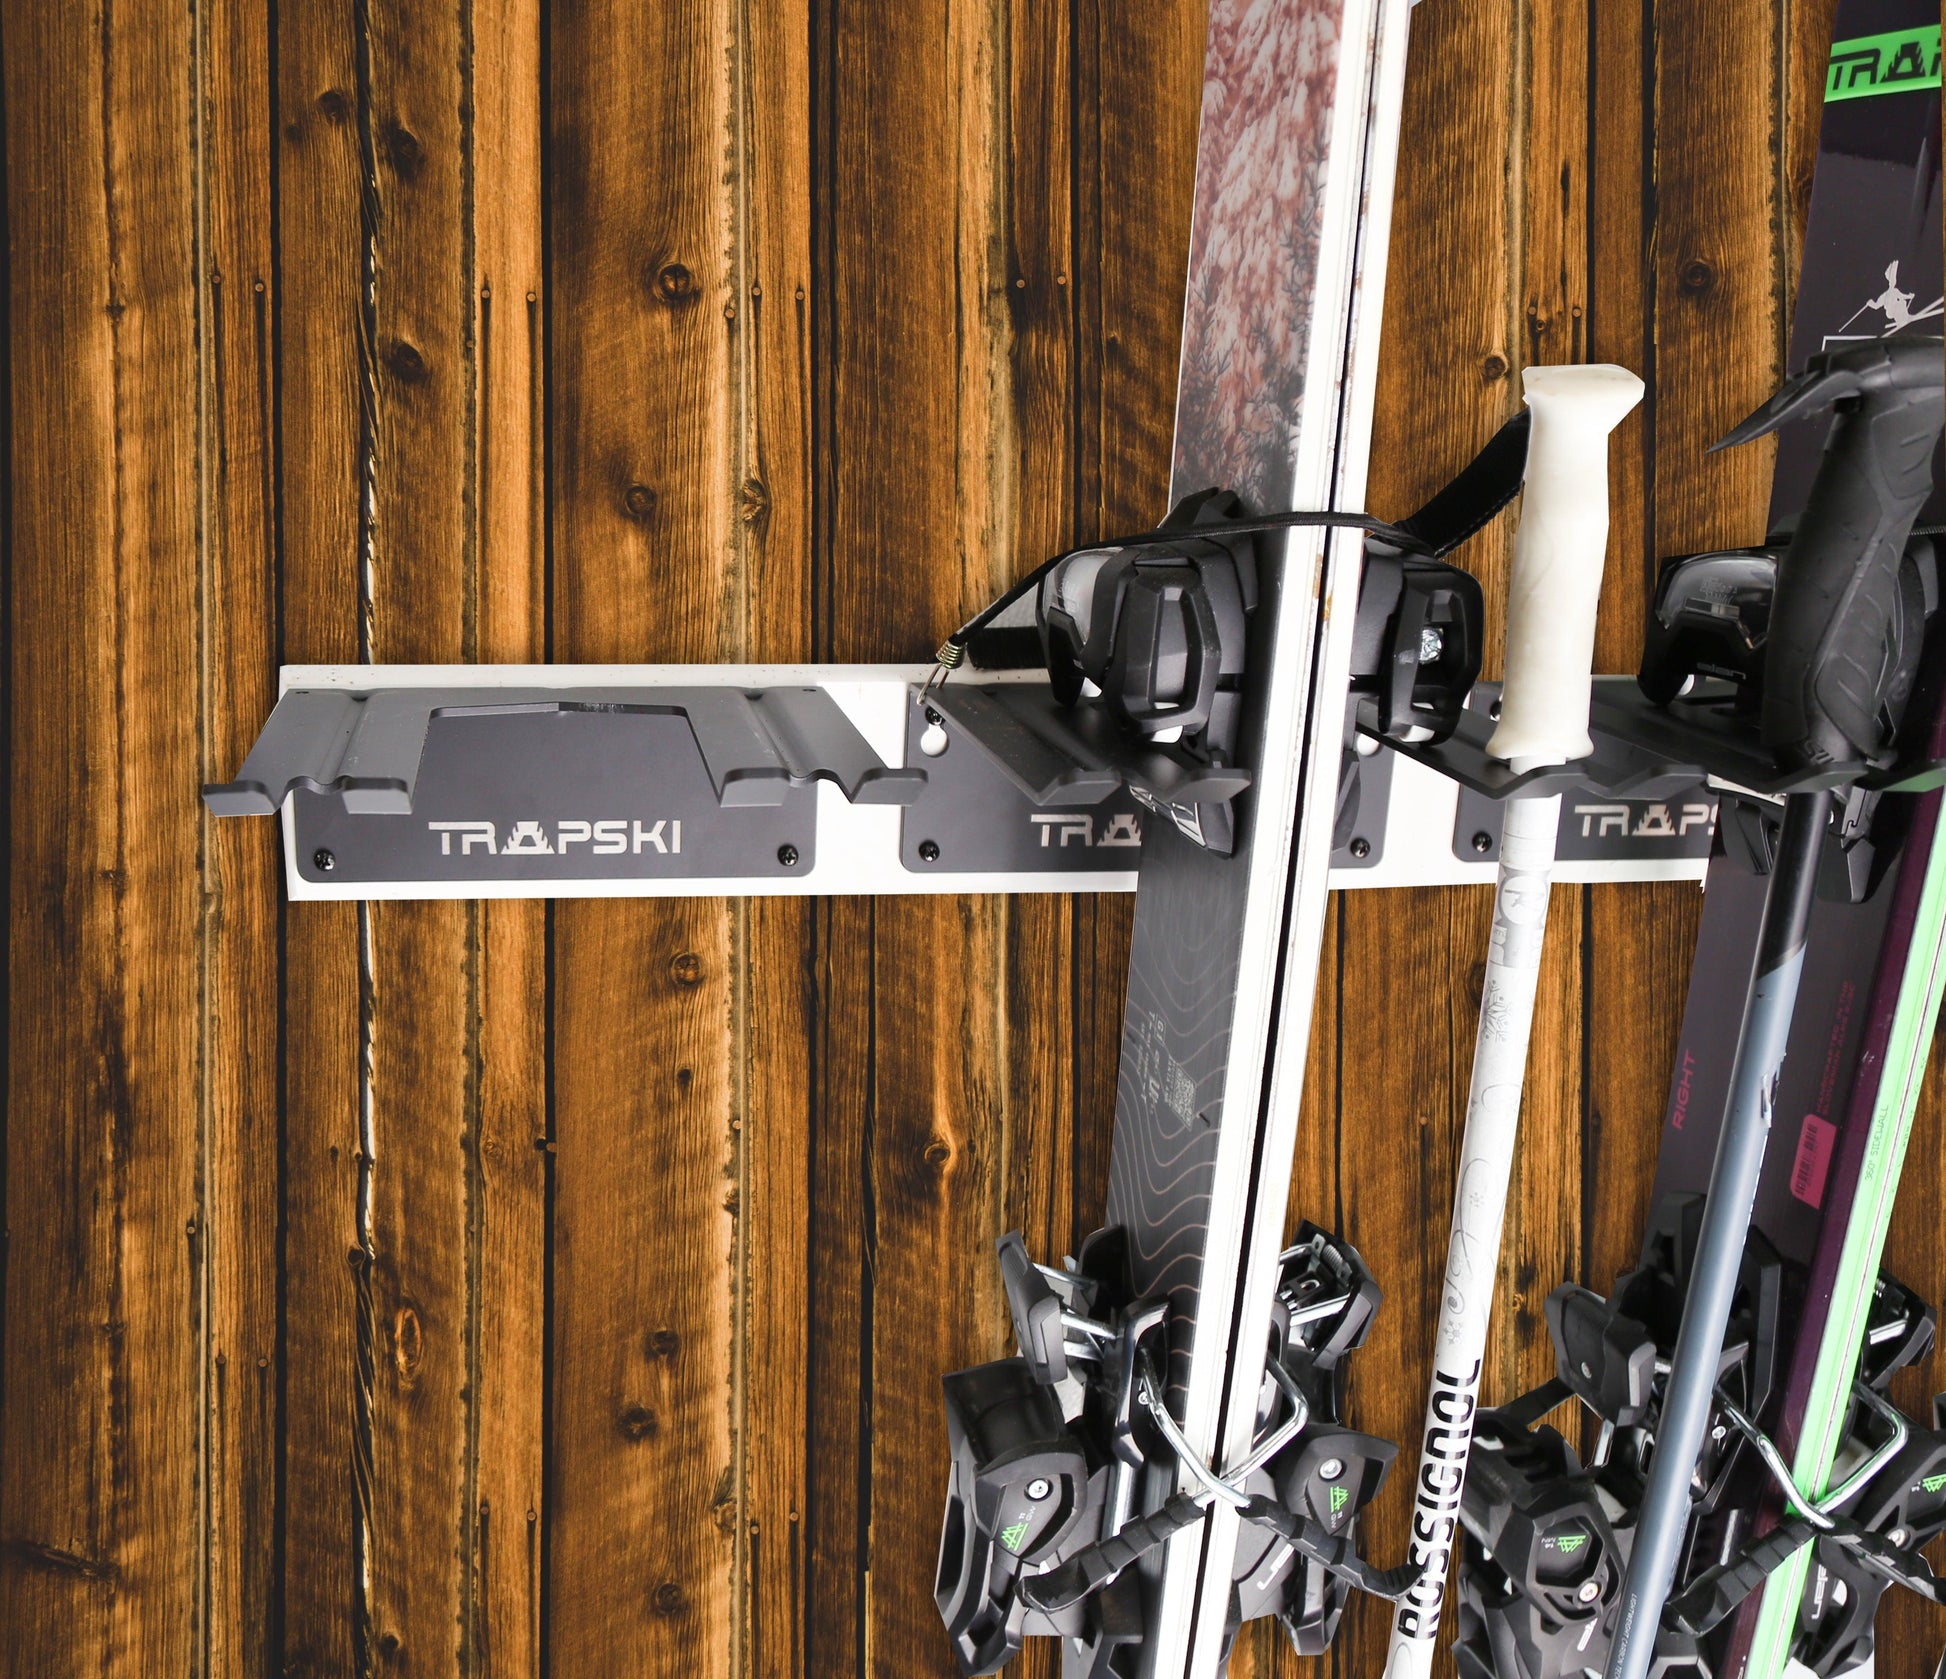 TRAPAWAY Wall Rack | Garage Organizer for Yard Tools, Gear & Equipment | Holds Skis or Snowboard by Bindings | Aluminum | No Moving Parts to Break or